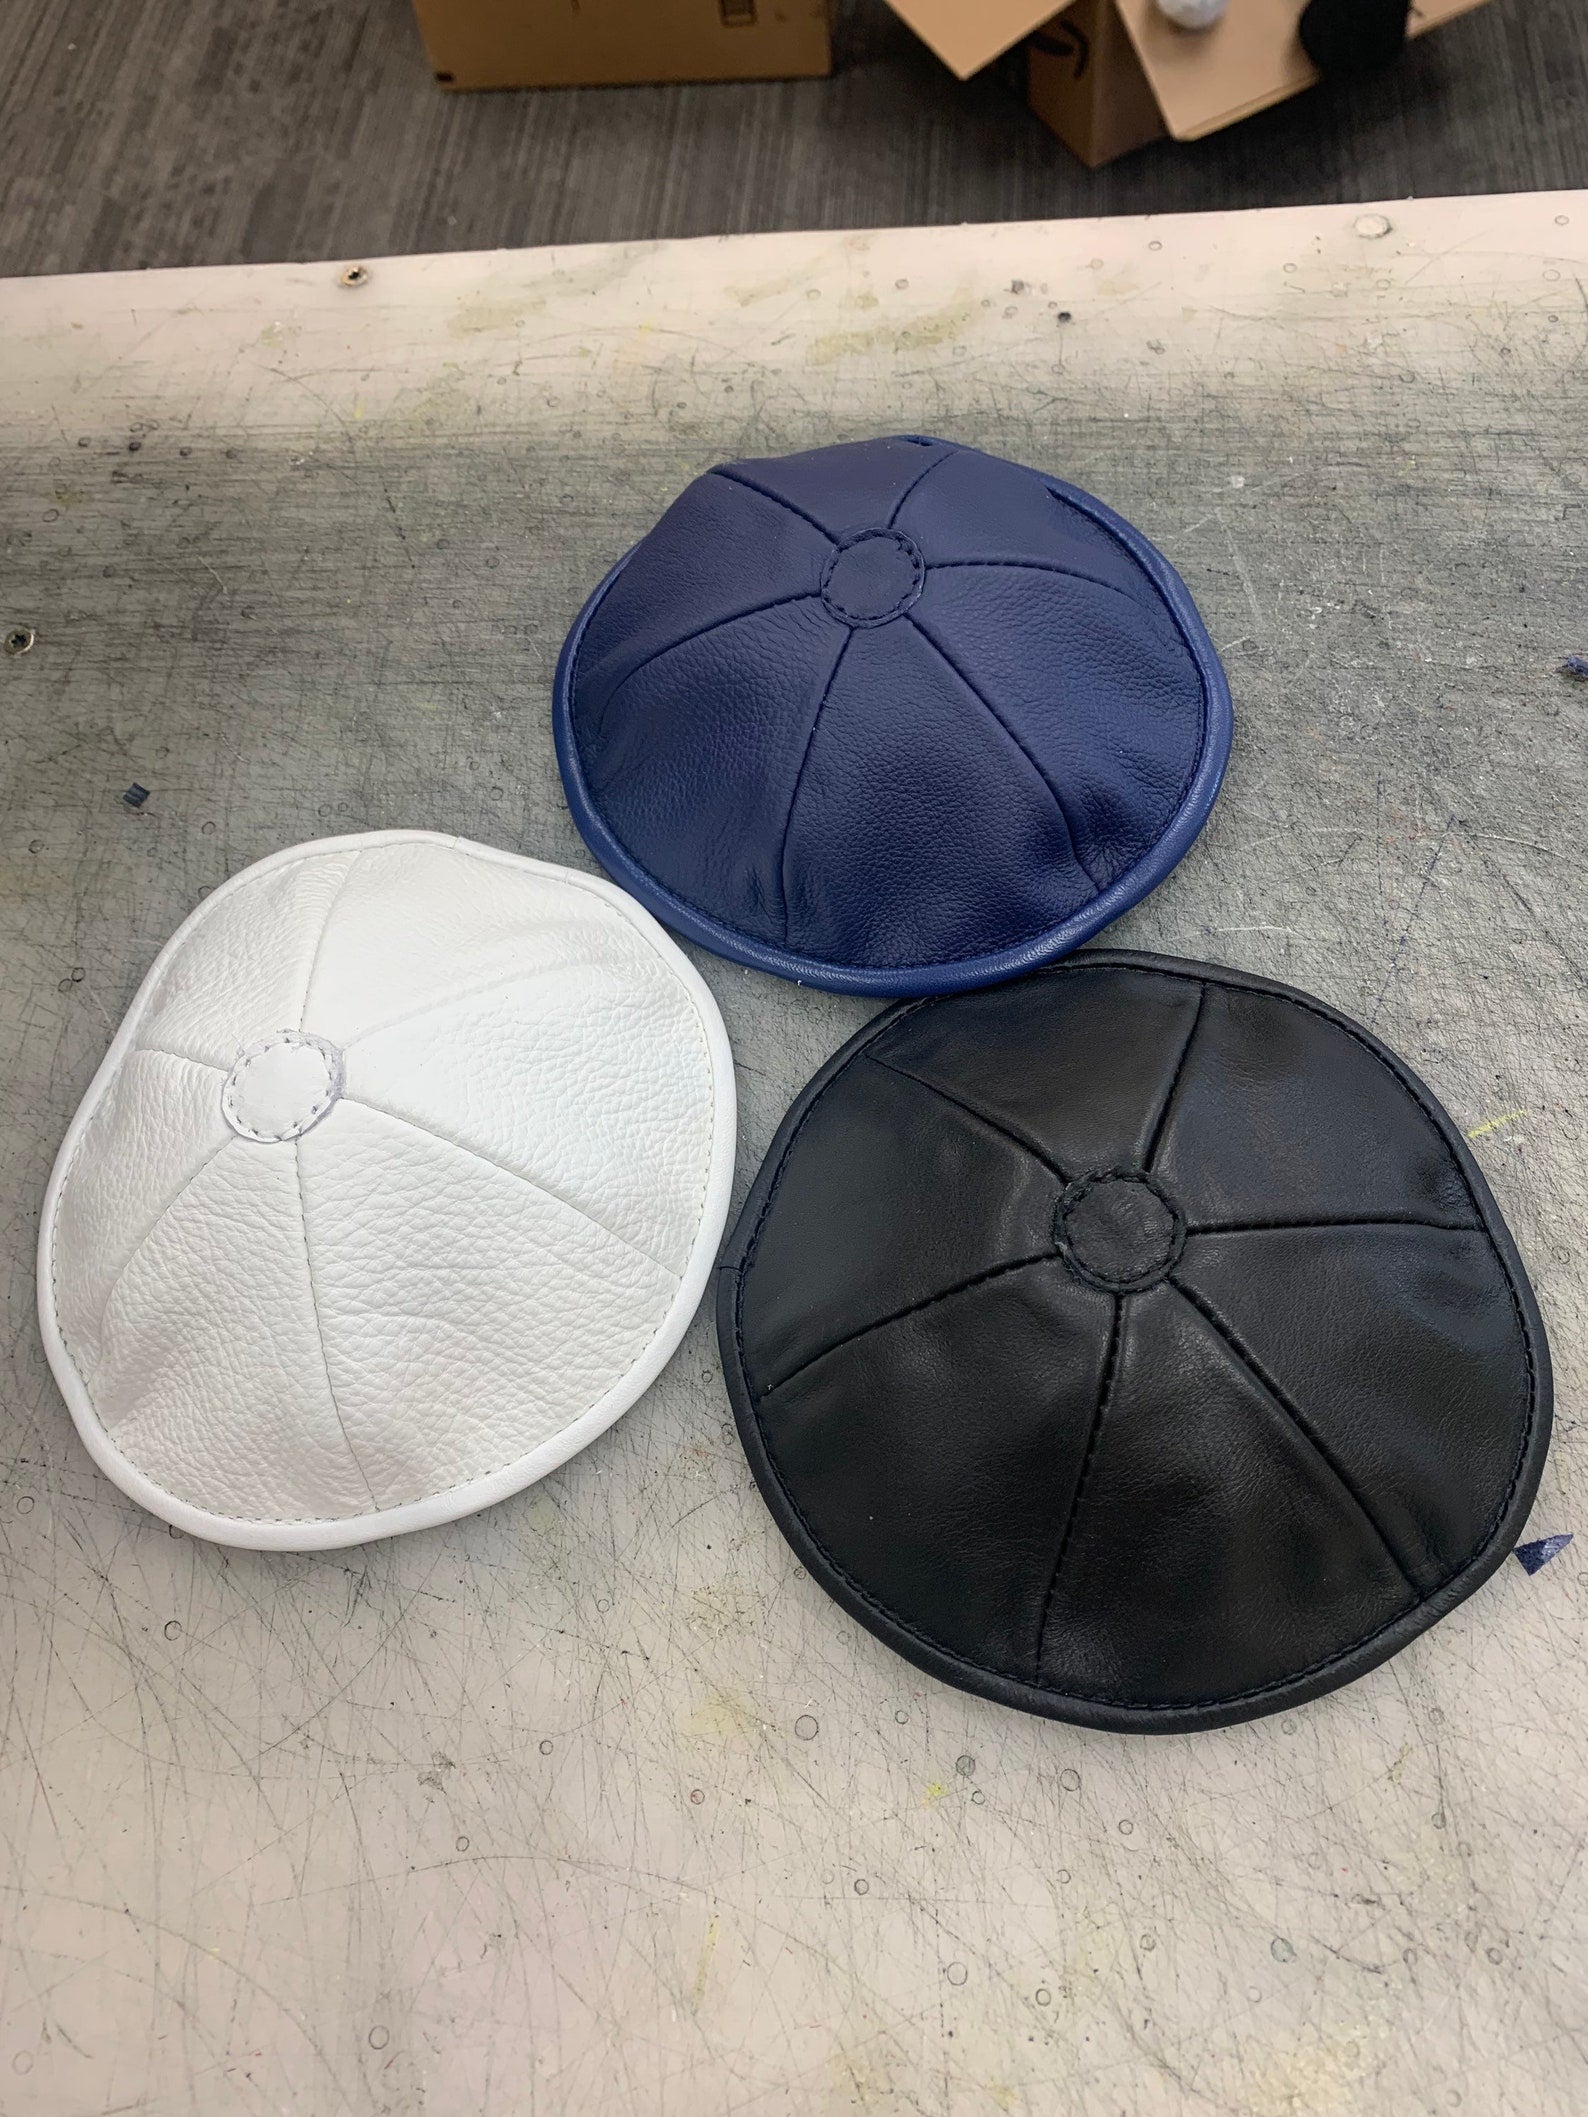 Leather Yarmulke in royal blue, black, and white